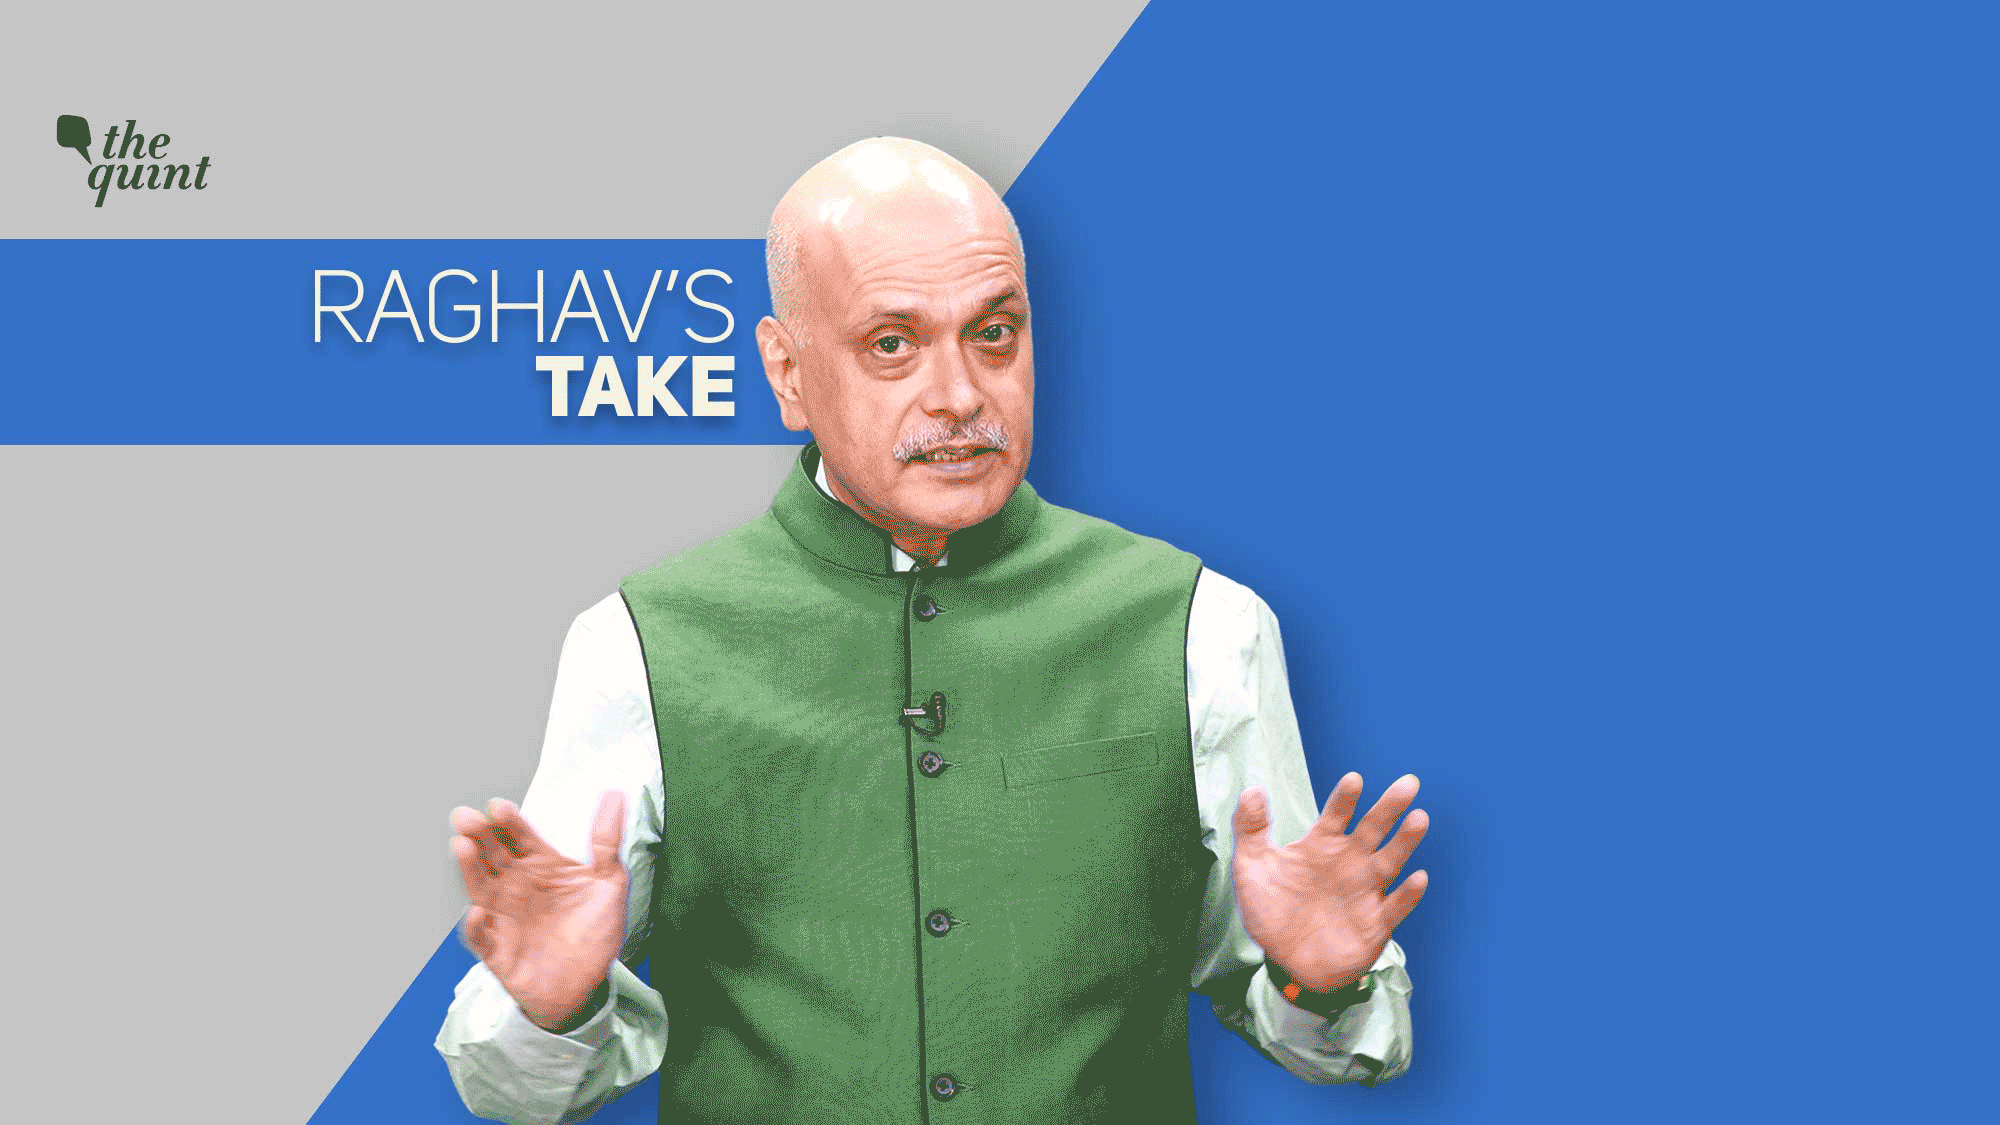 Image of Raghav Bahl, Founder-Editor, The Quint, used for representational purposes.